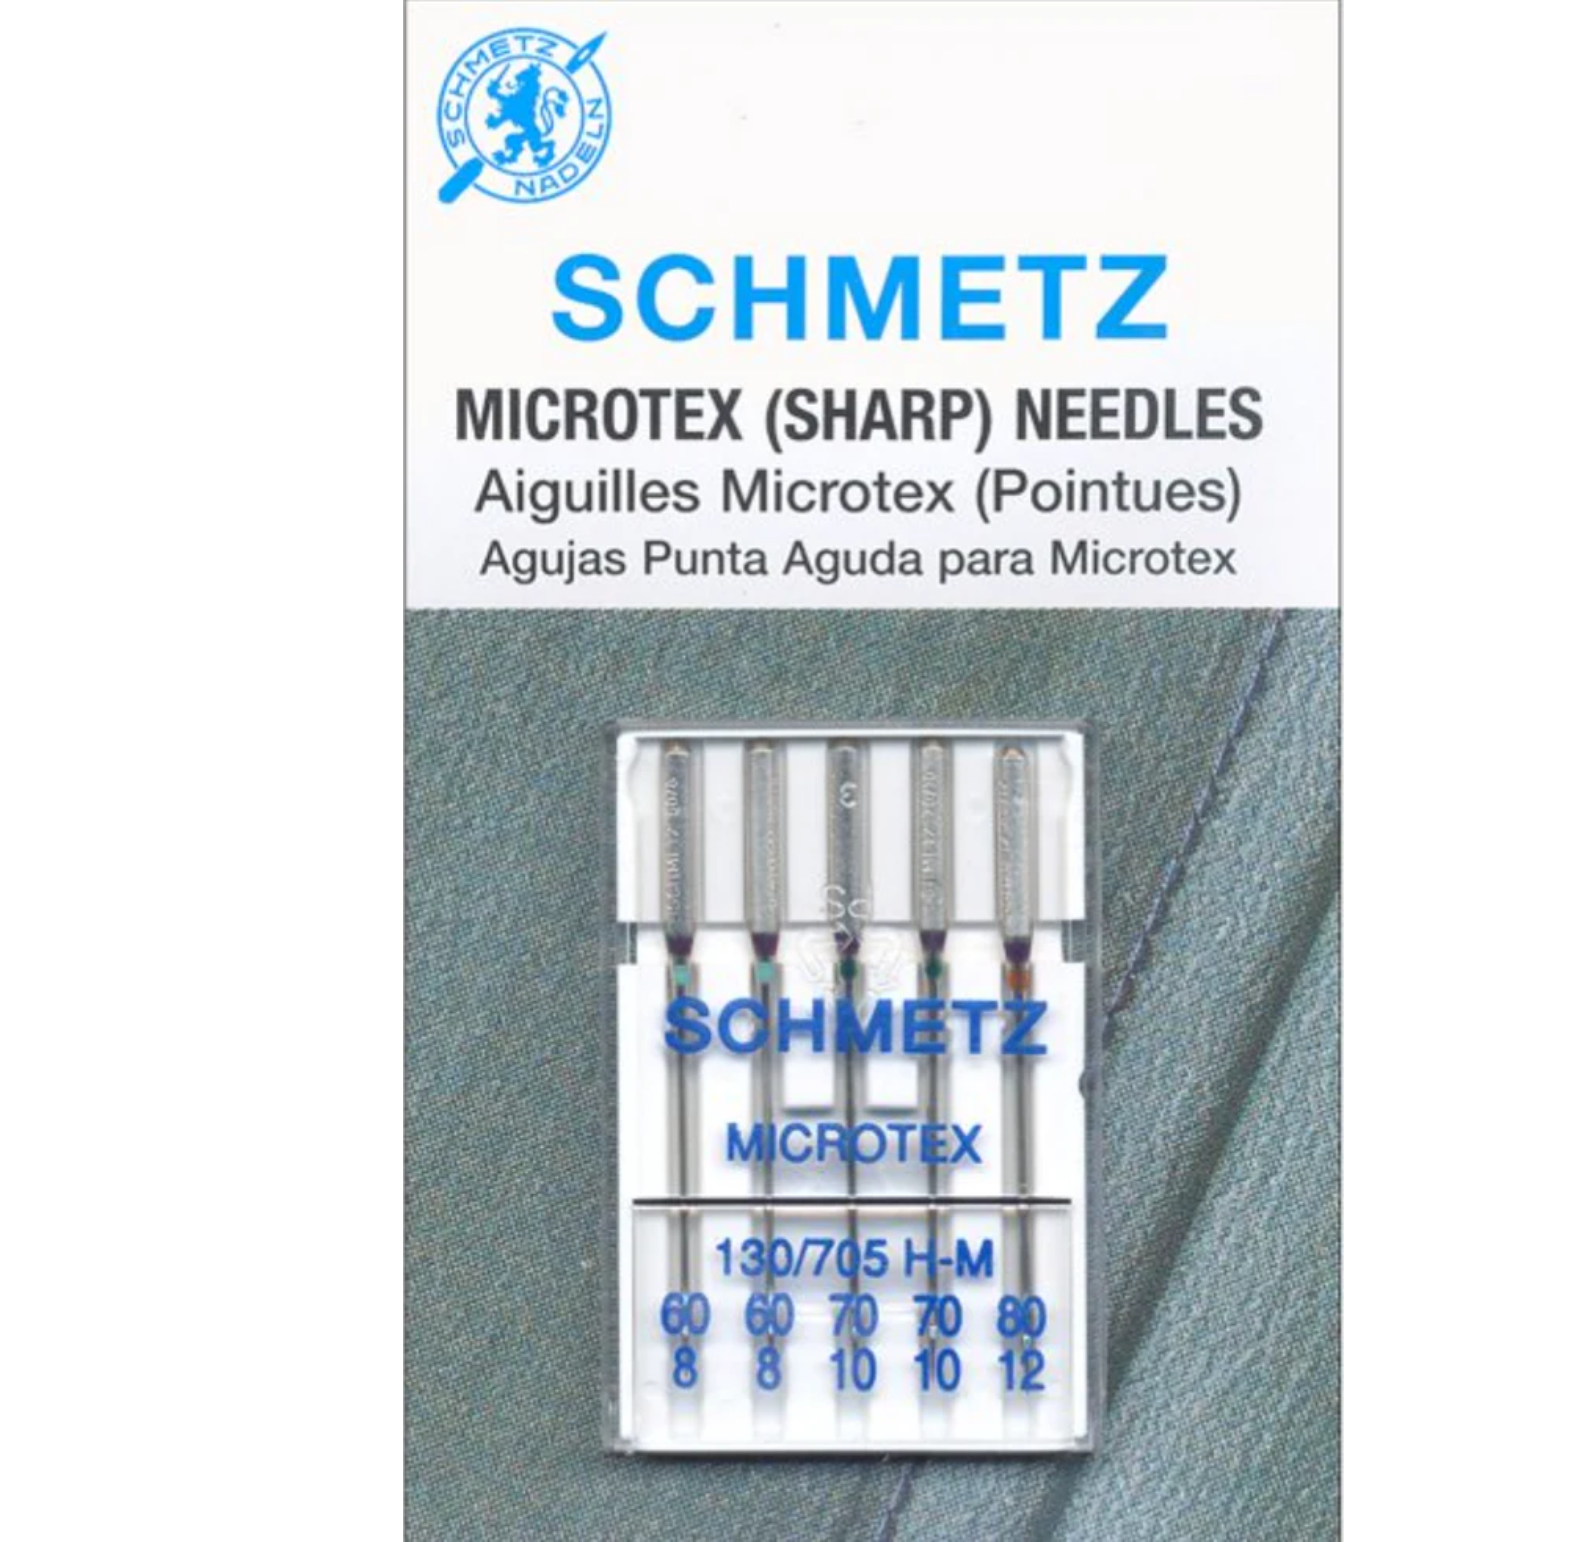 Microtex (Sharp) Needles Assorted 5 Pack